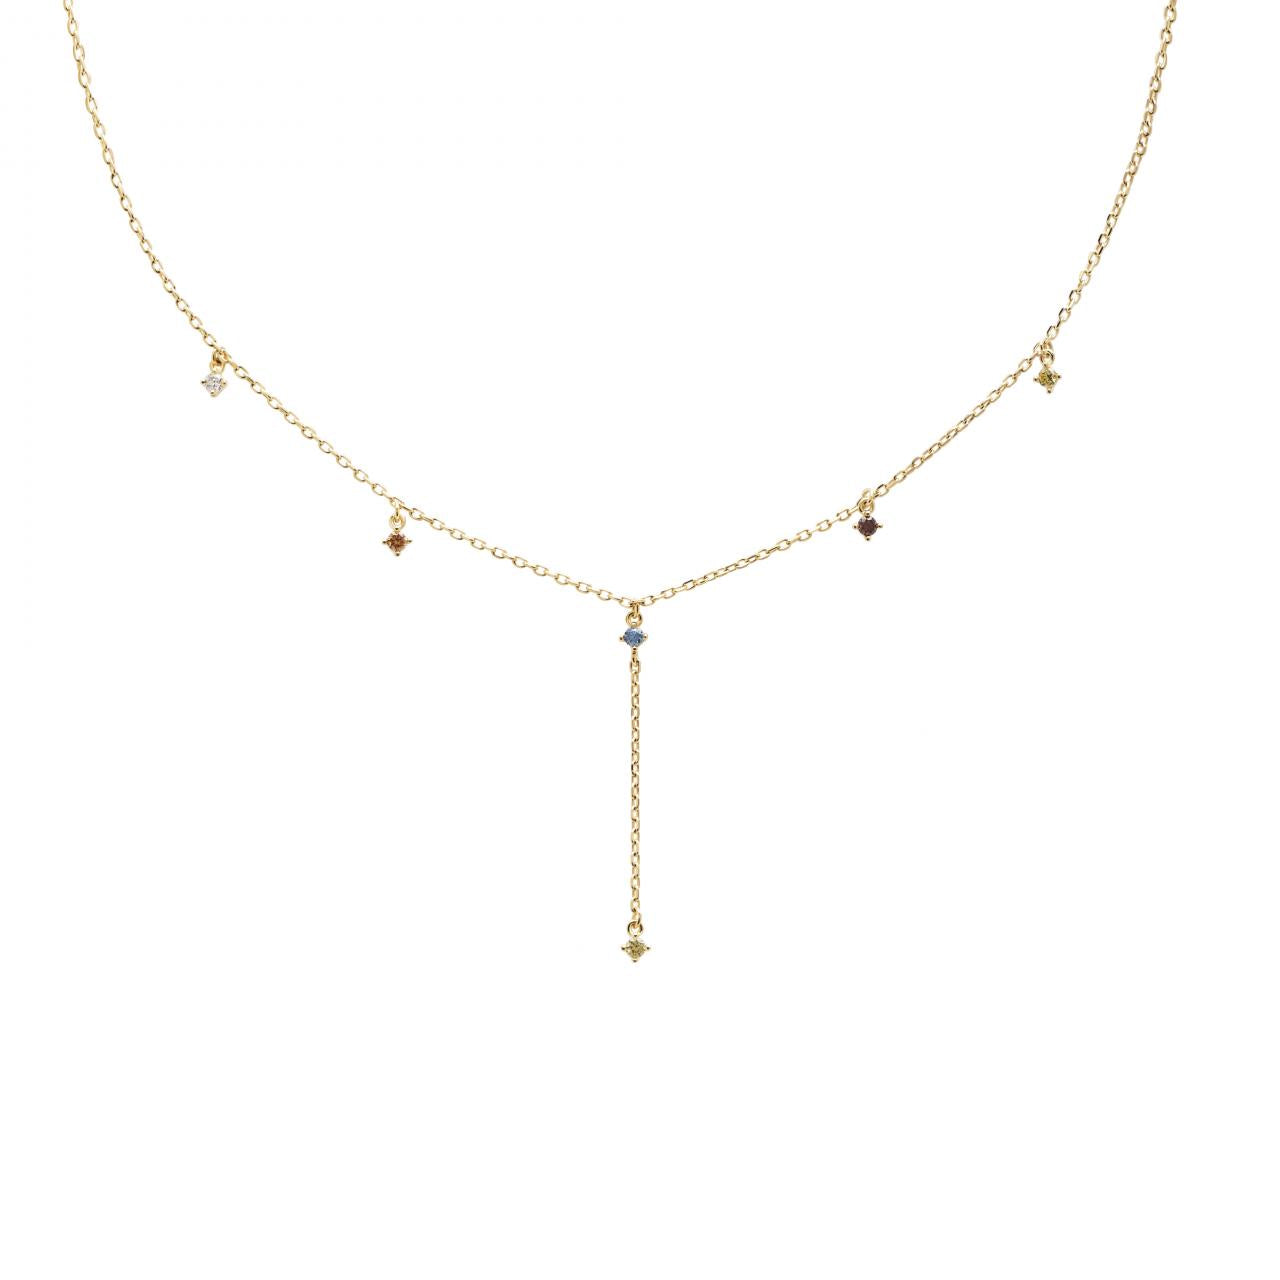 PD Paola 18ct Gold Plated Five Mana Necklace 55cm